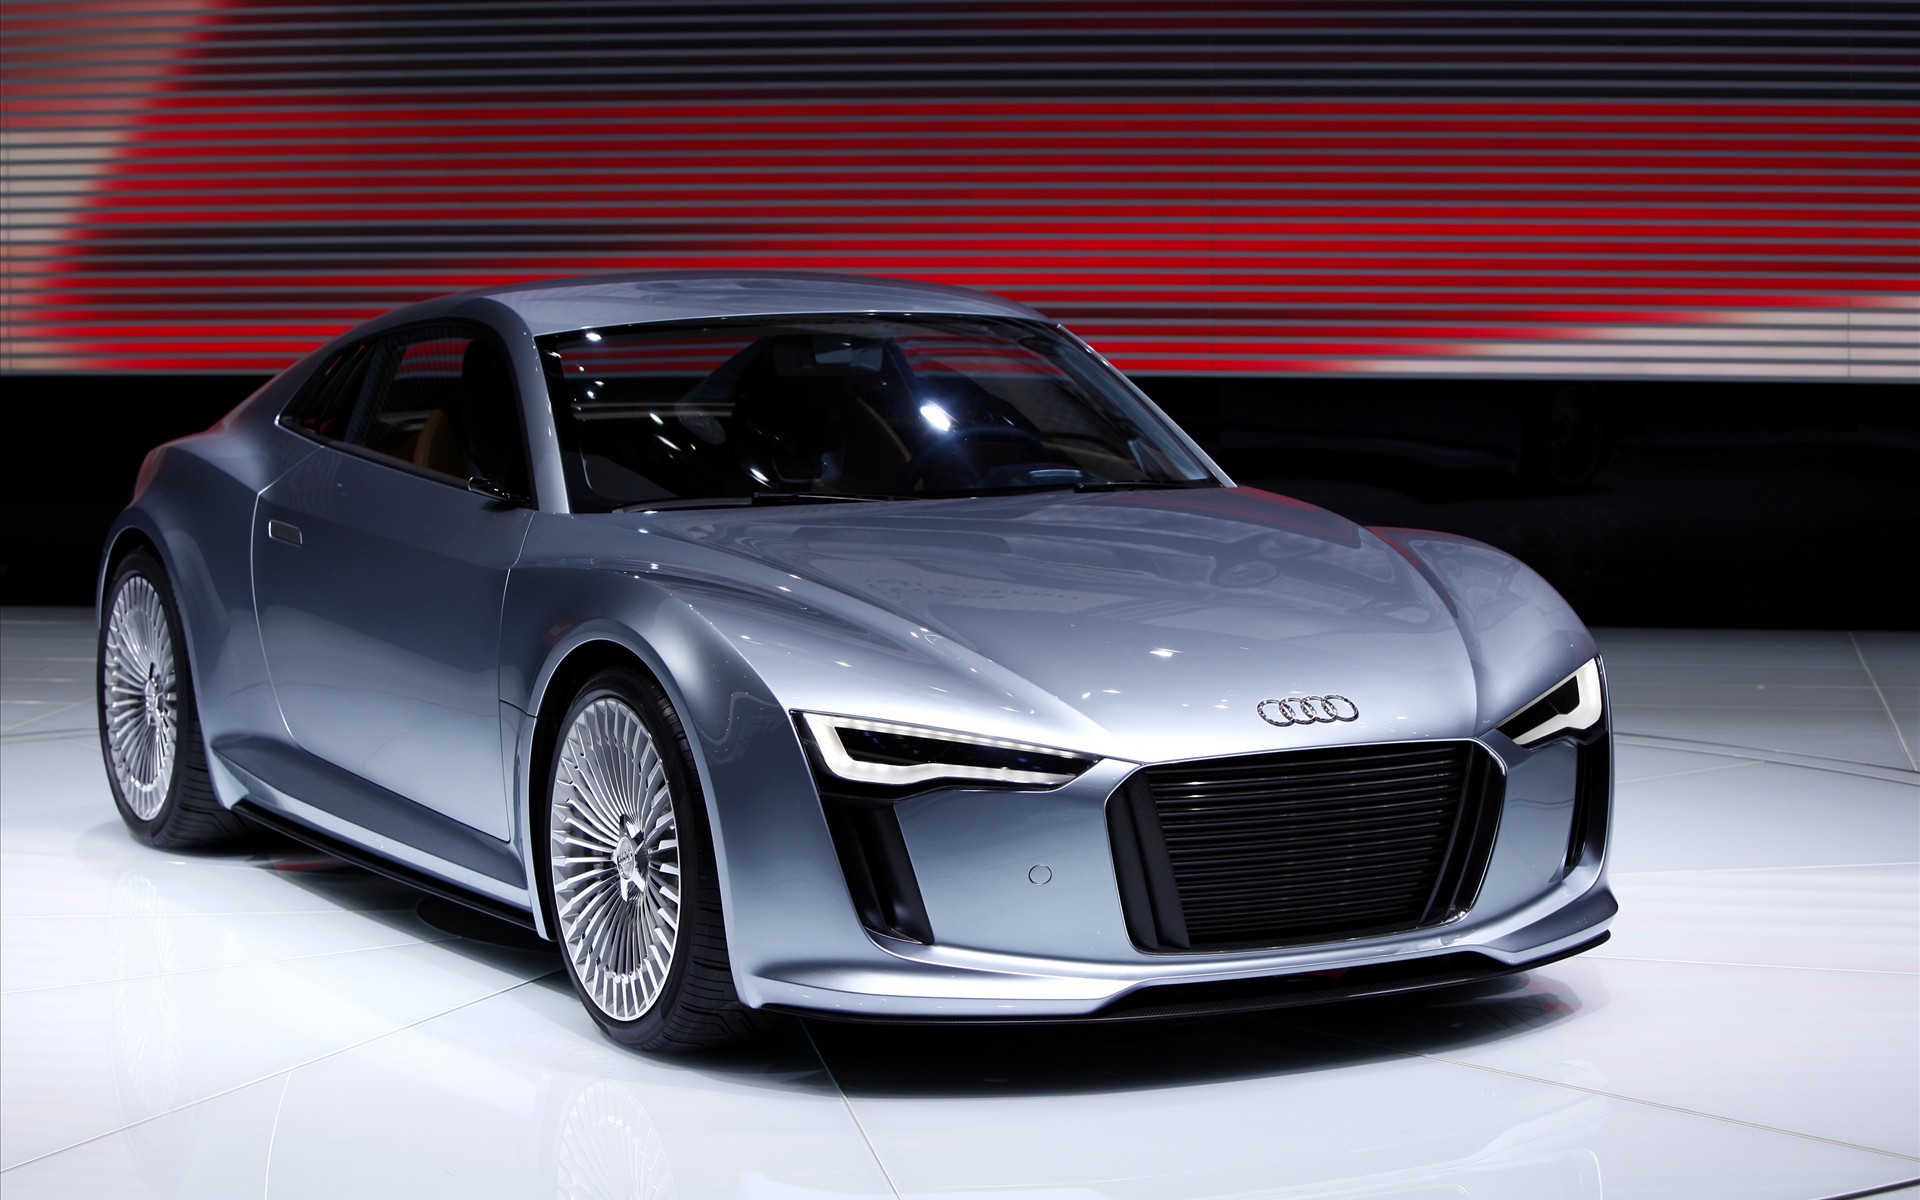 New Electric Audi Coupe - HD Wallpaper 